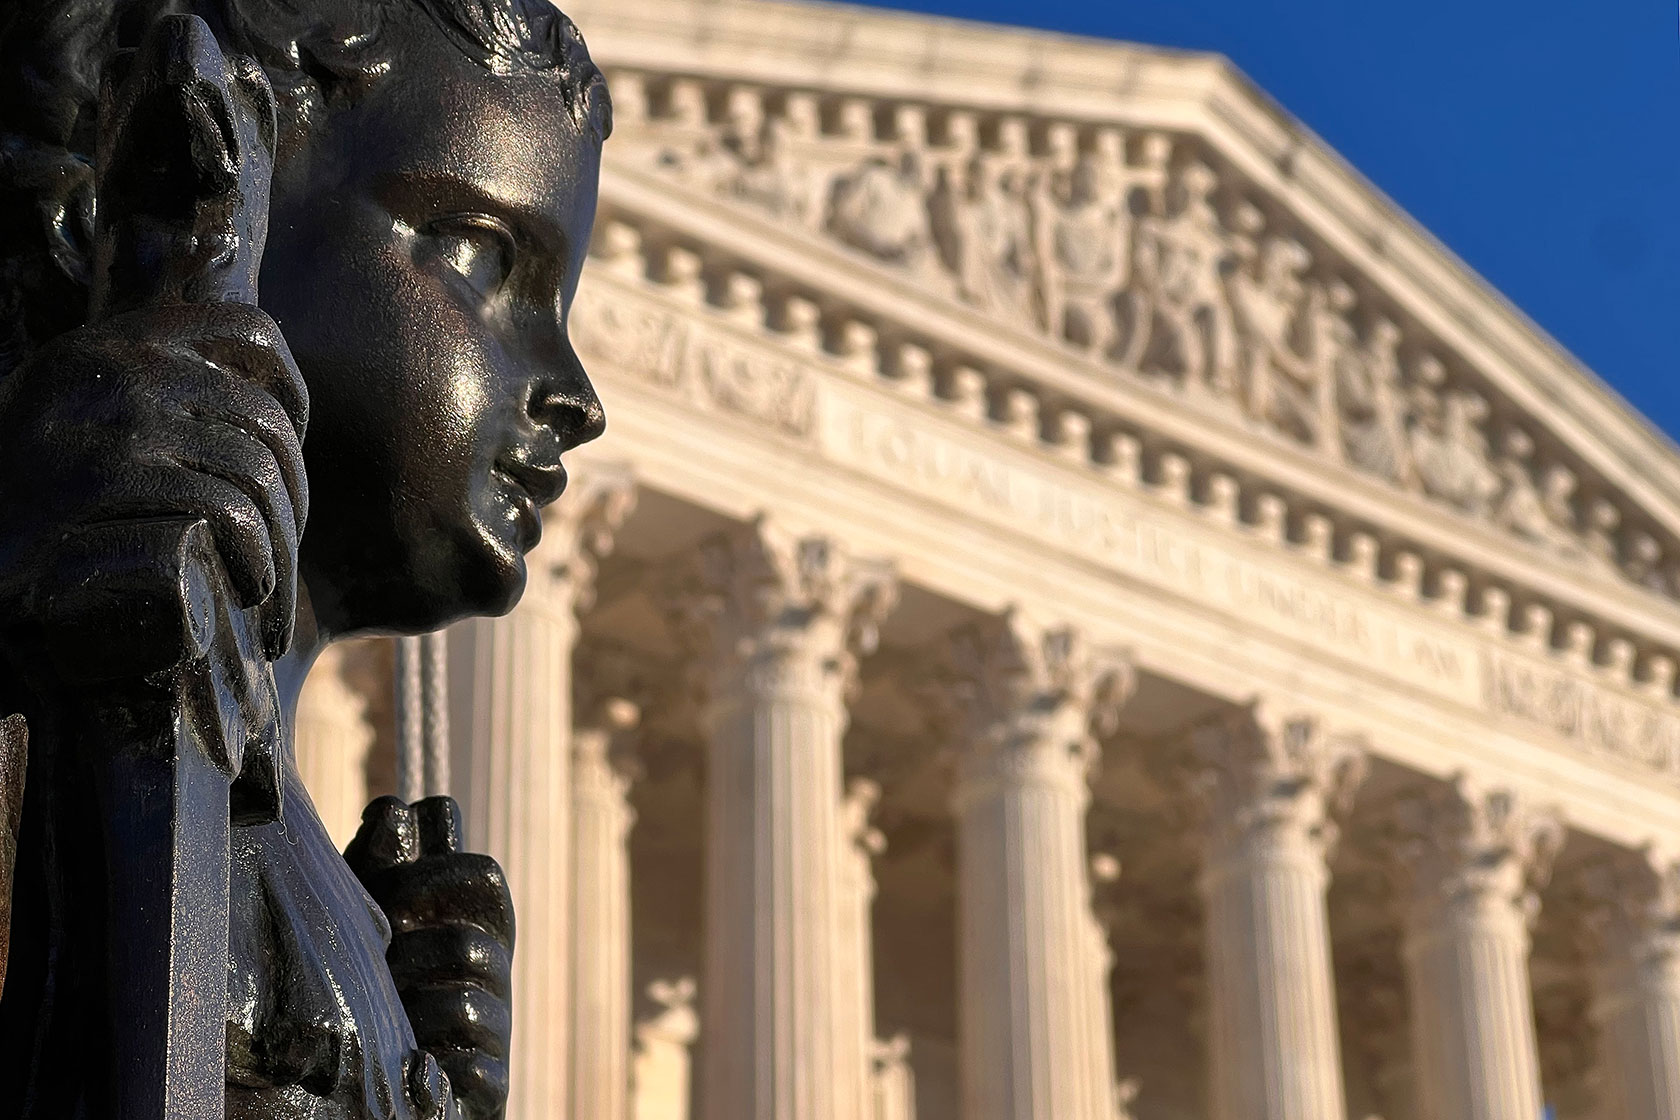 A statue stands in front of the U.S. Supreme Court building in Washington, D.C.